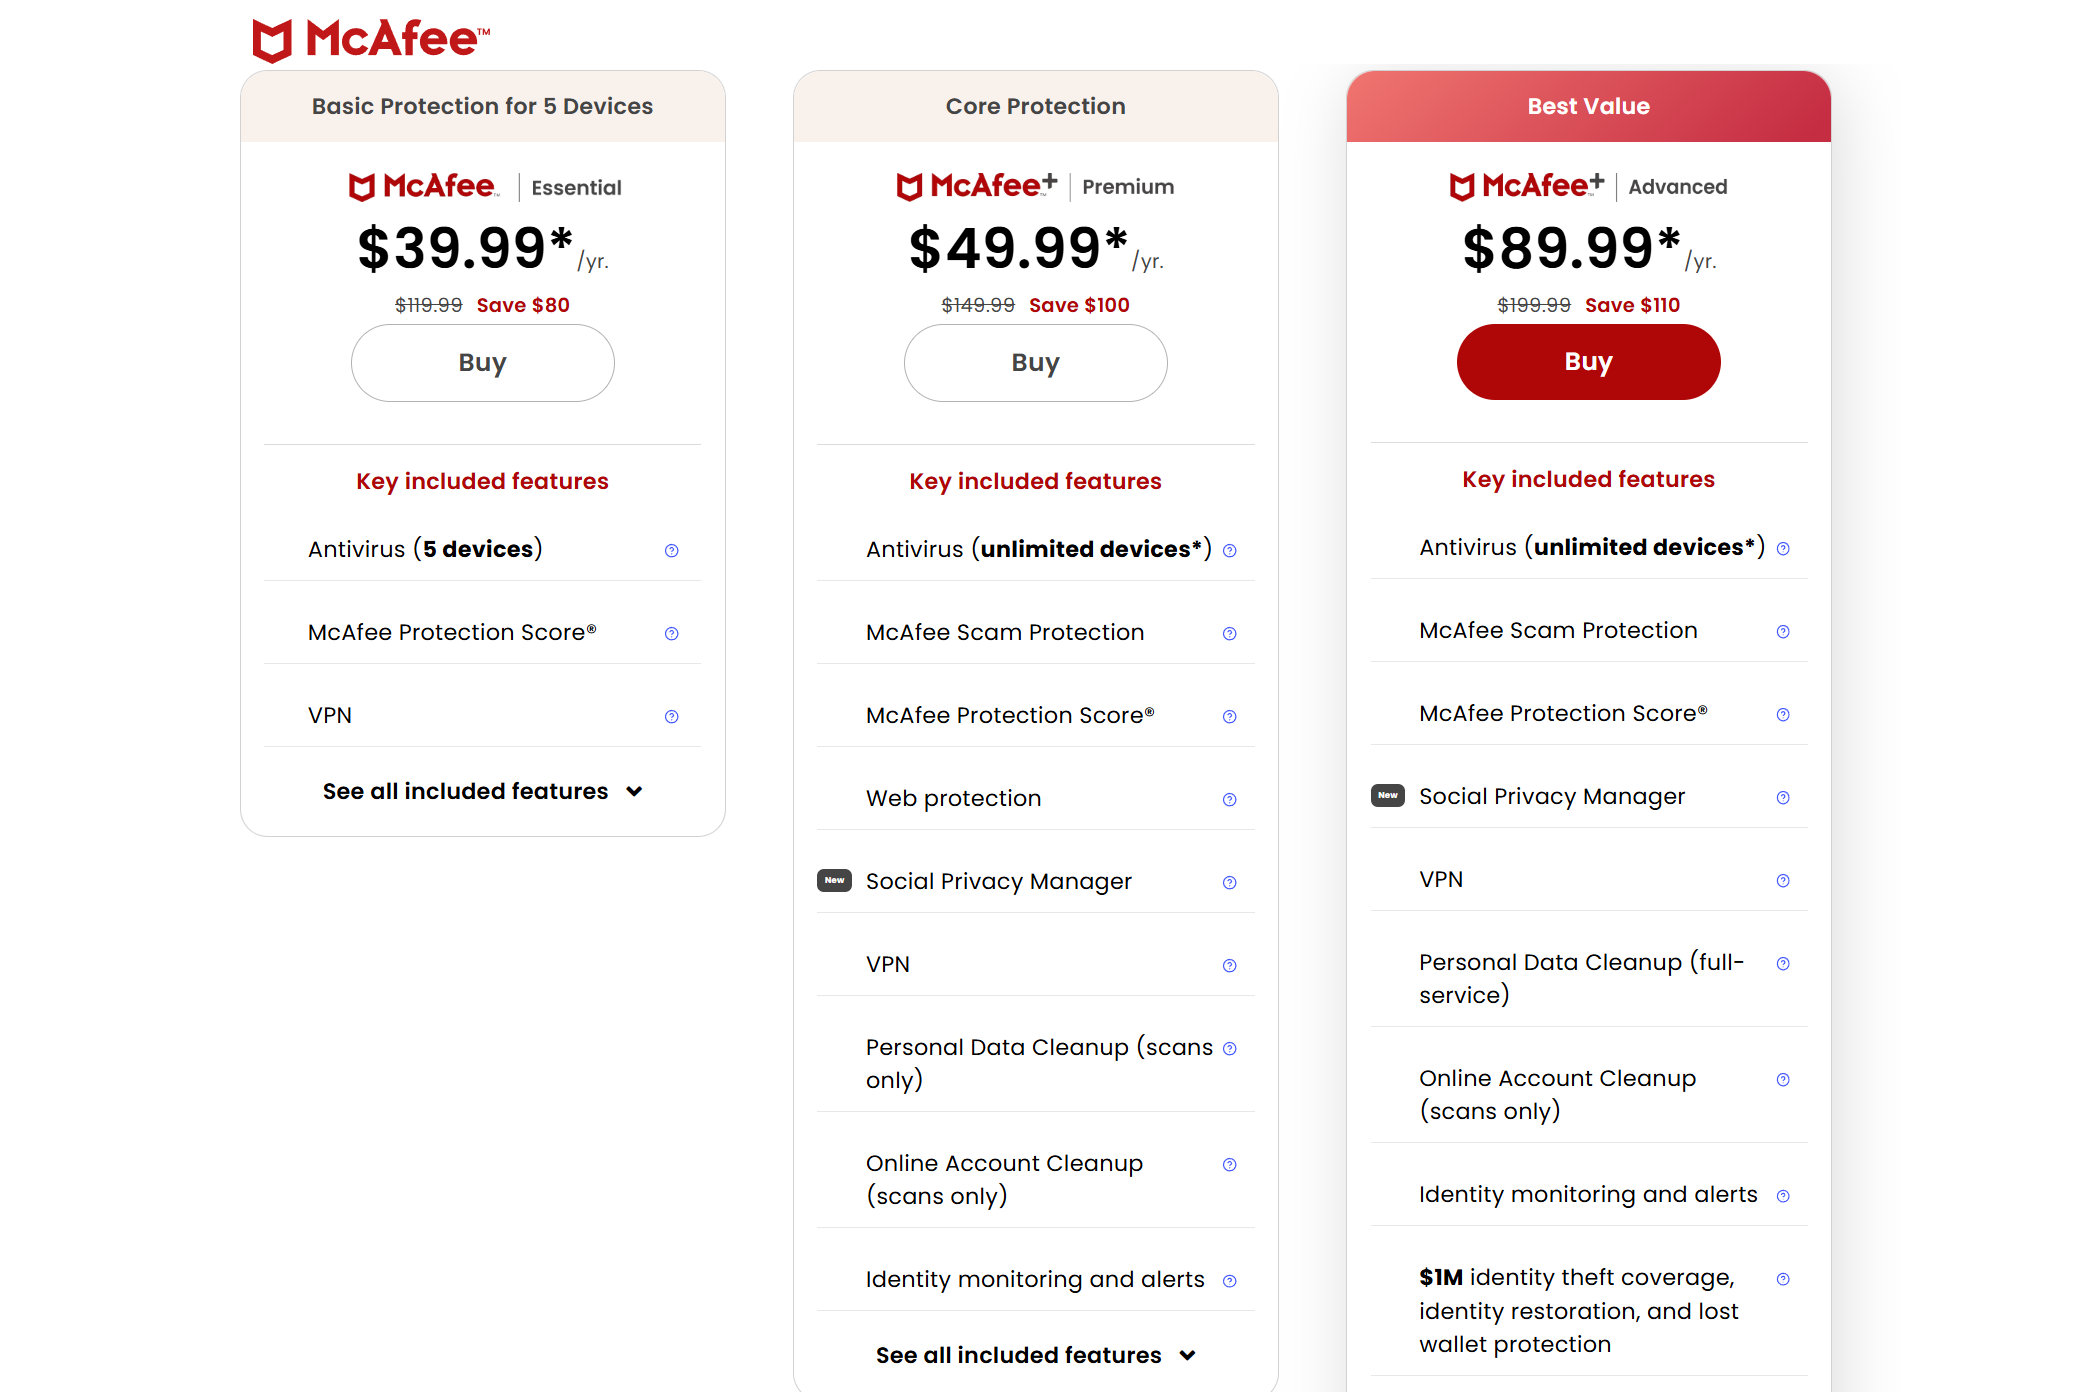 McAfee has several price tiers and there's a family plan for each.